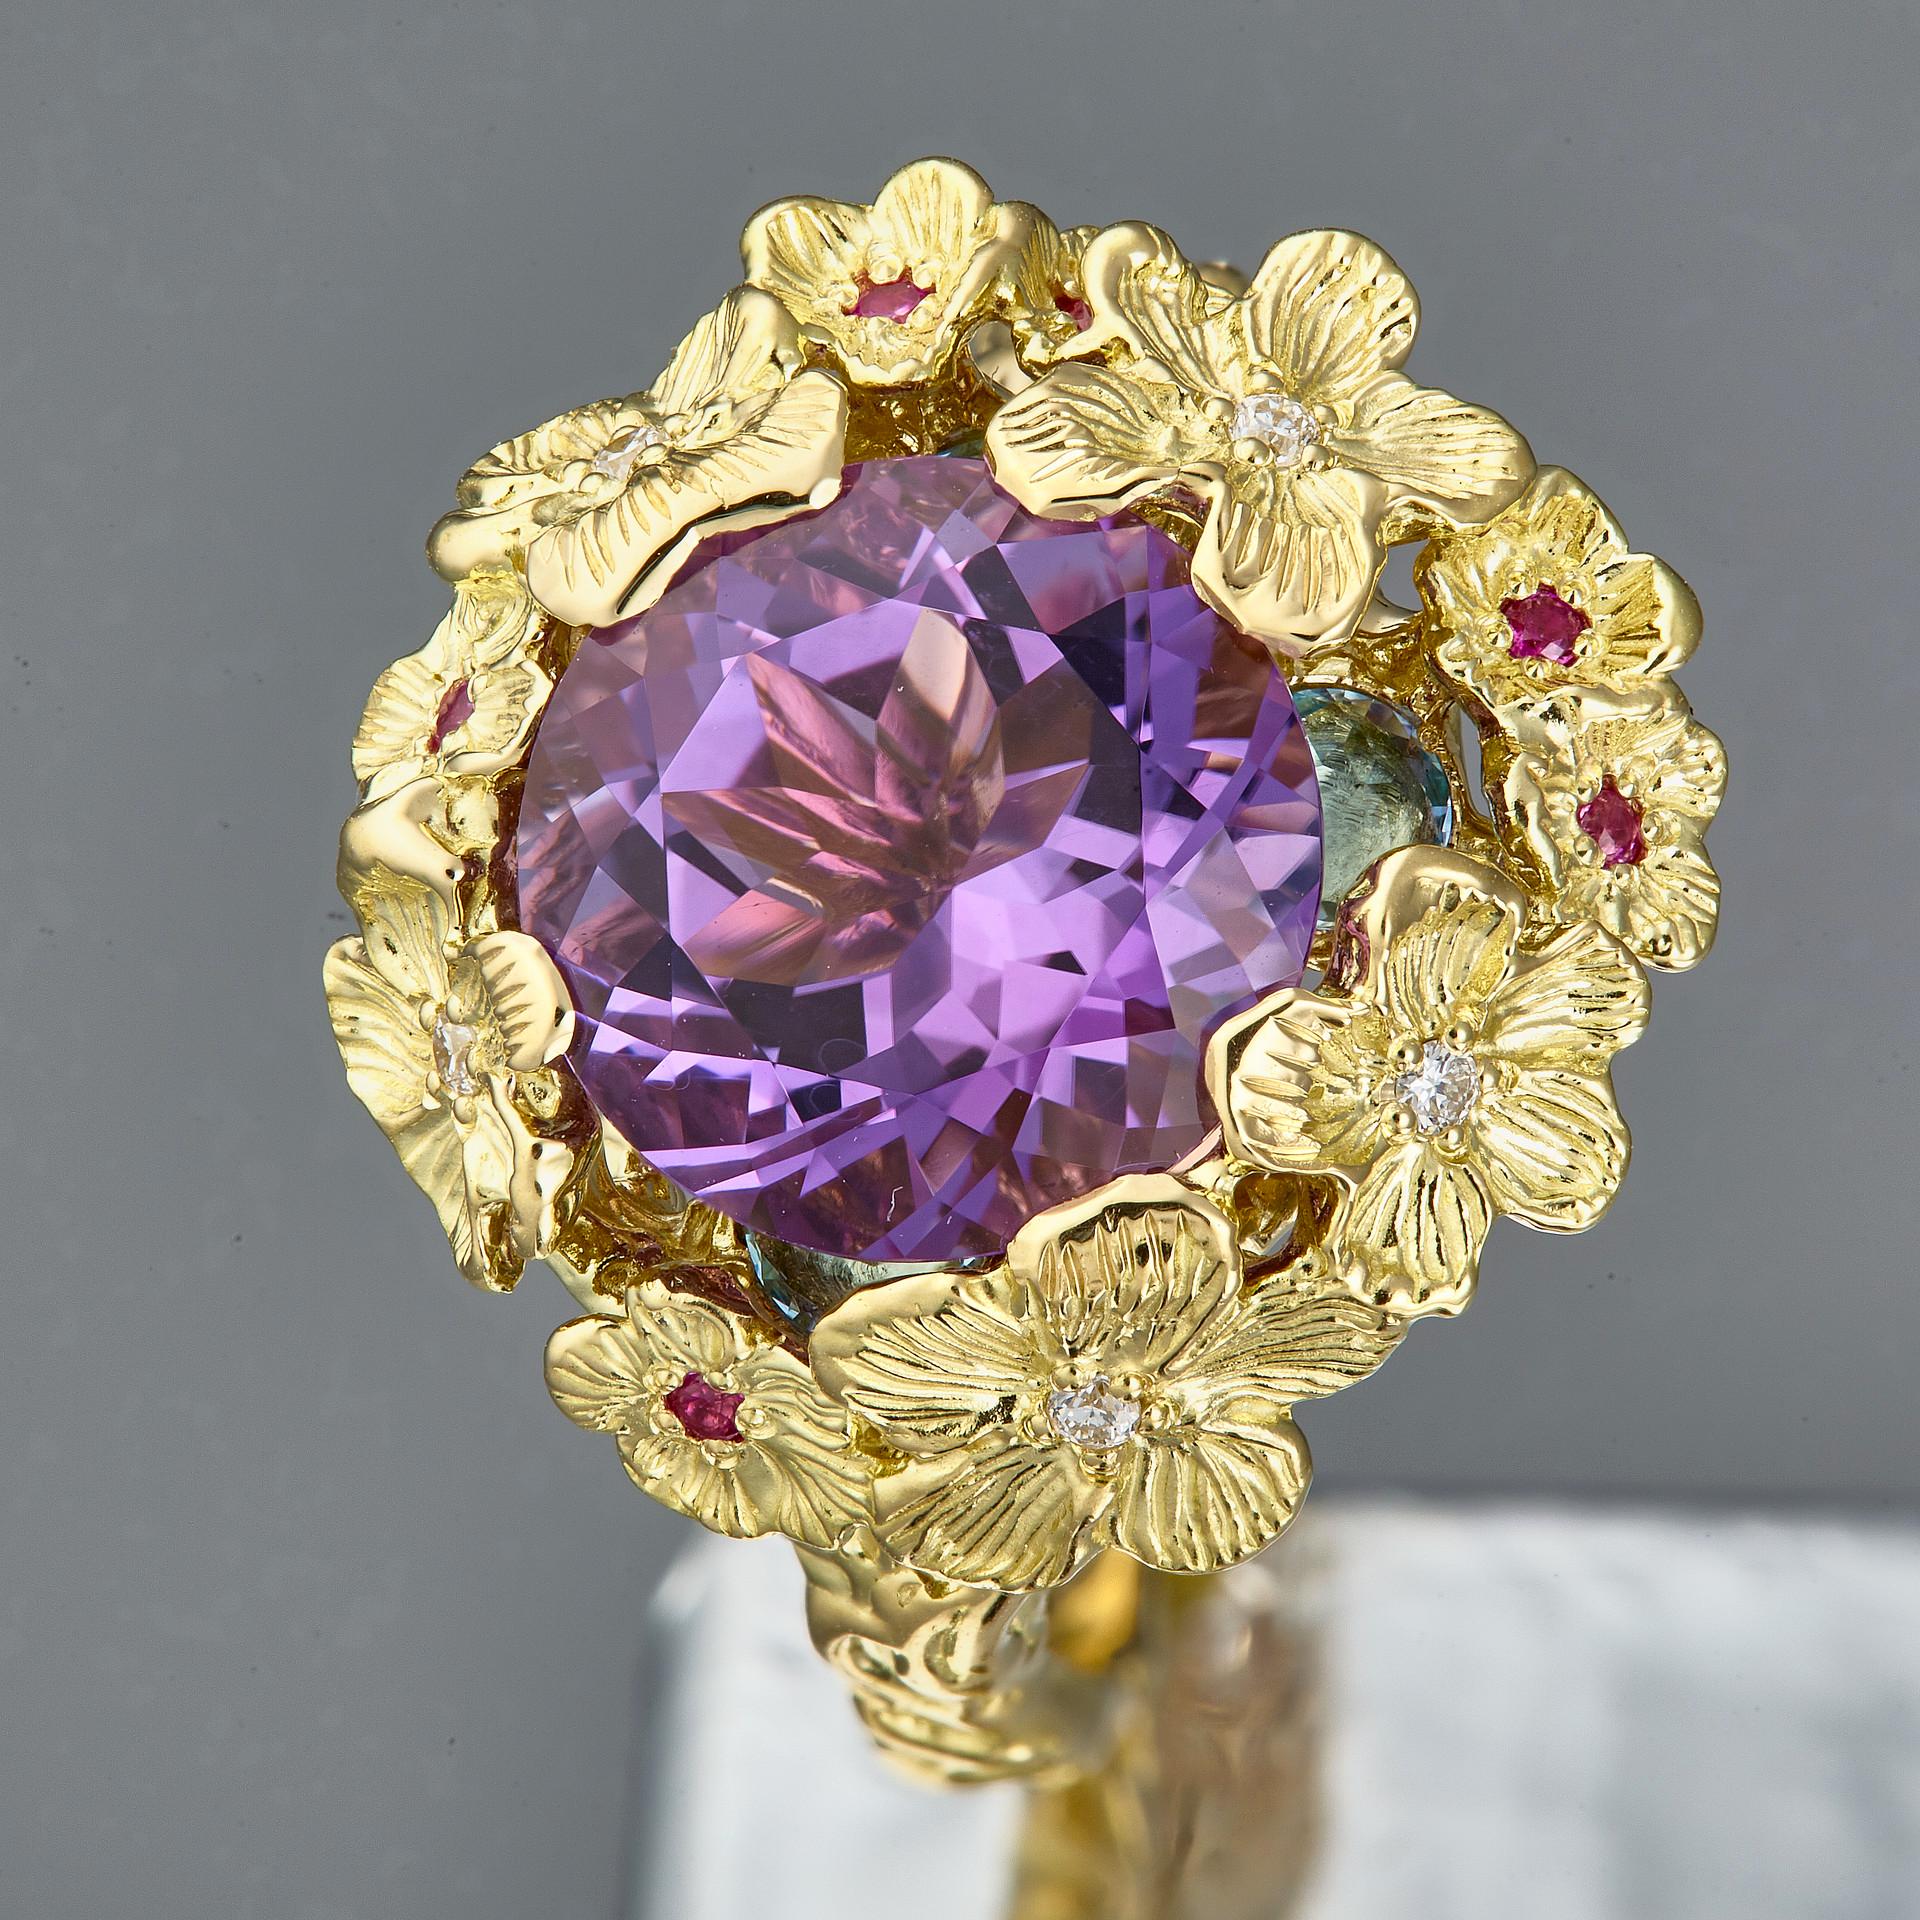 MOISEIKIN's most beautiful amethyst stone sparks beyond the artistically carved  branch- like filigree and gives you joy and courage all day long. 
The shining central amethyst is delicately held by flower petal prongs. If you look the ring